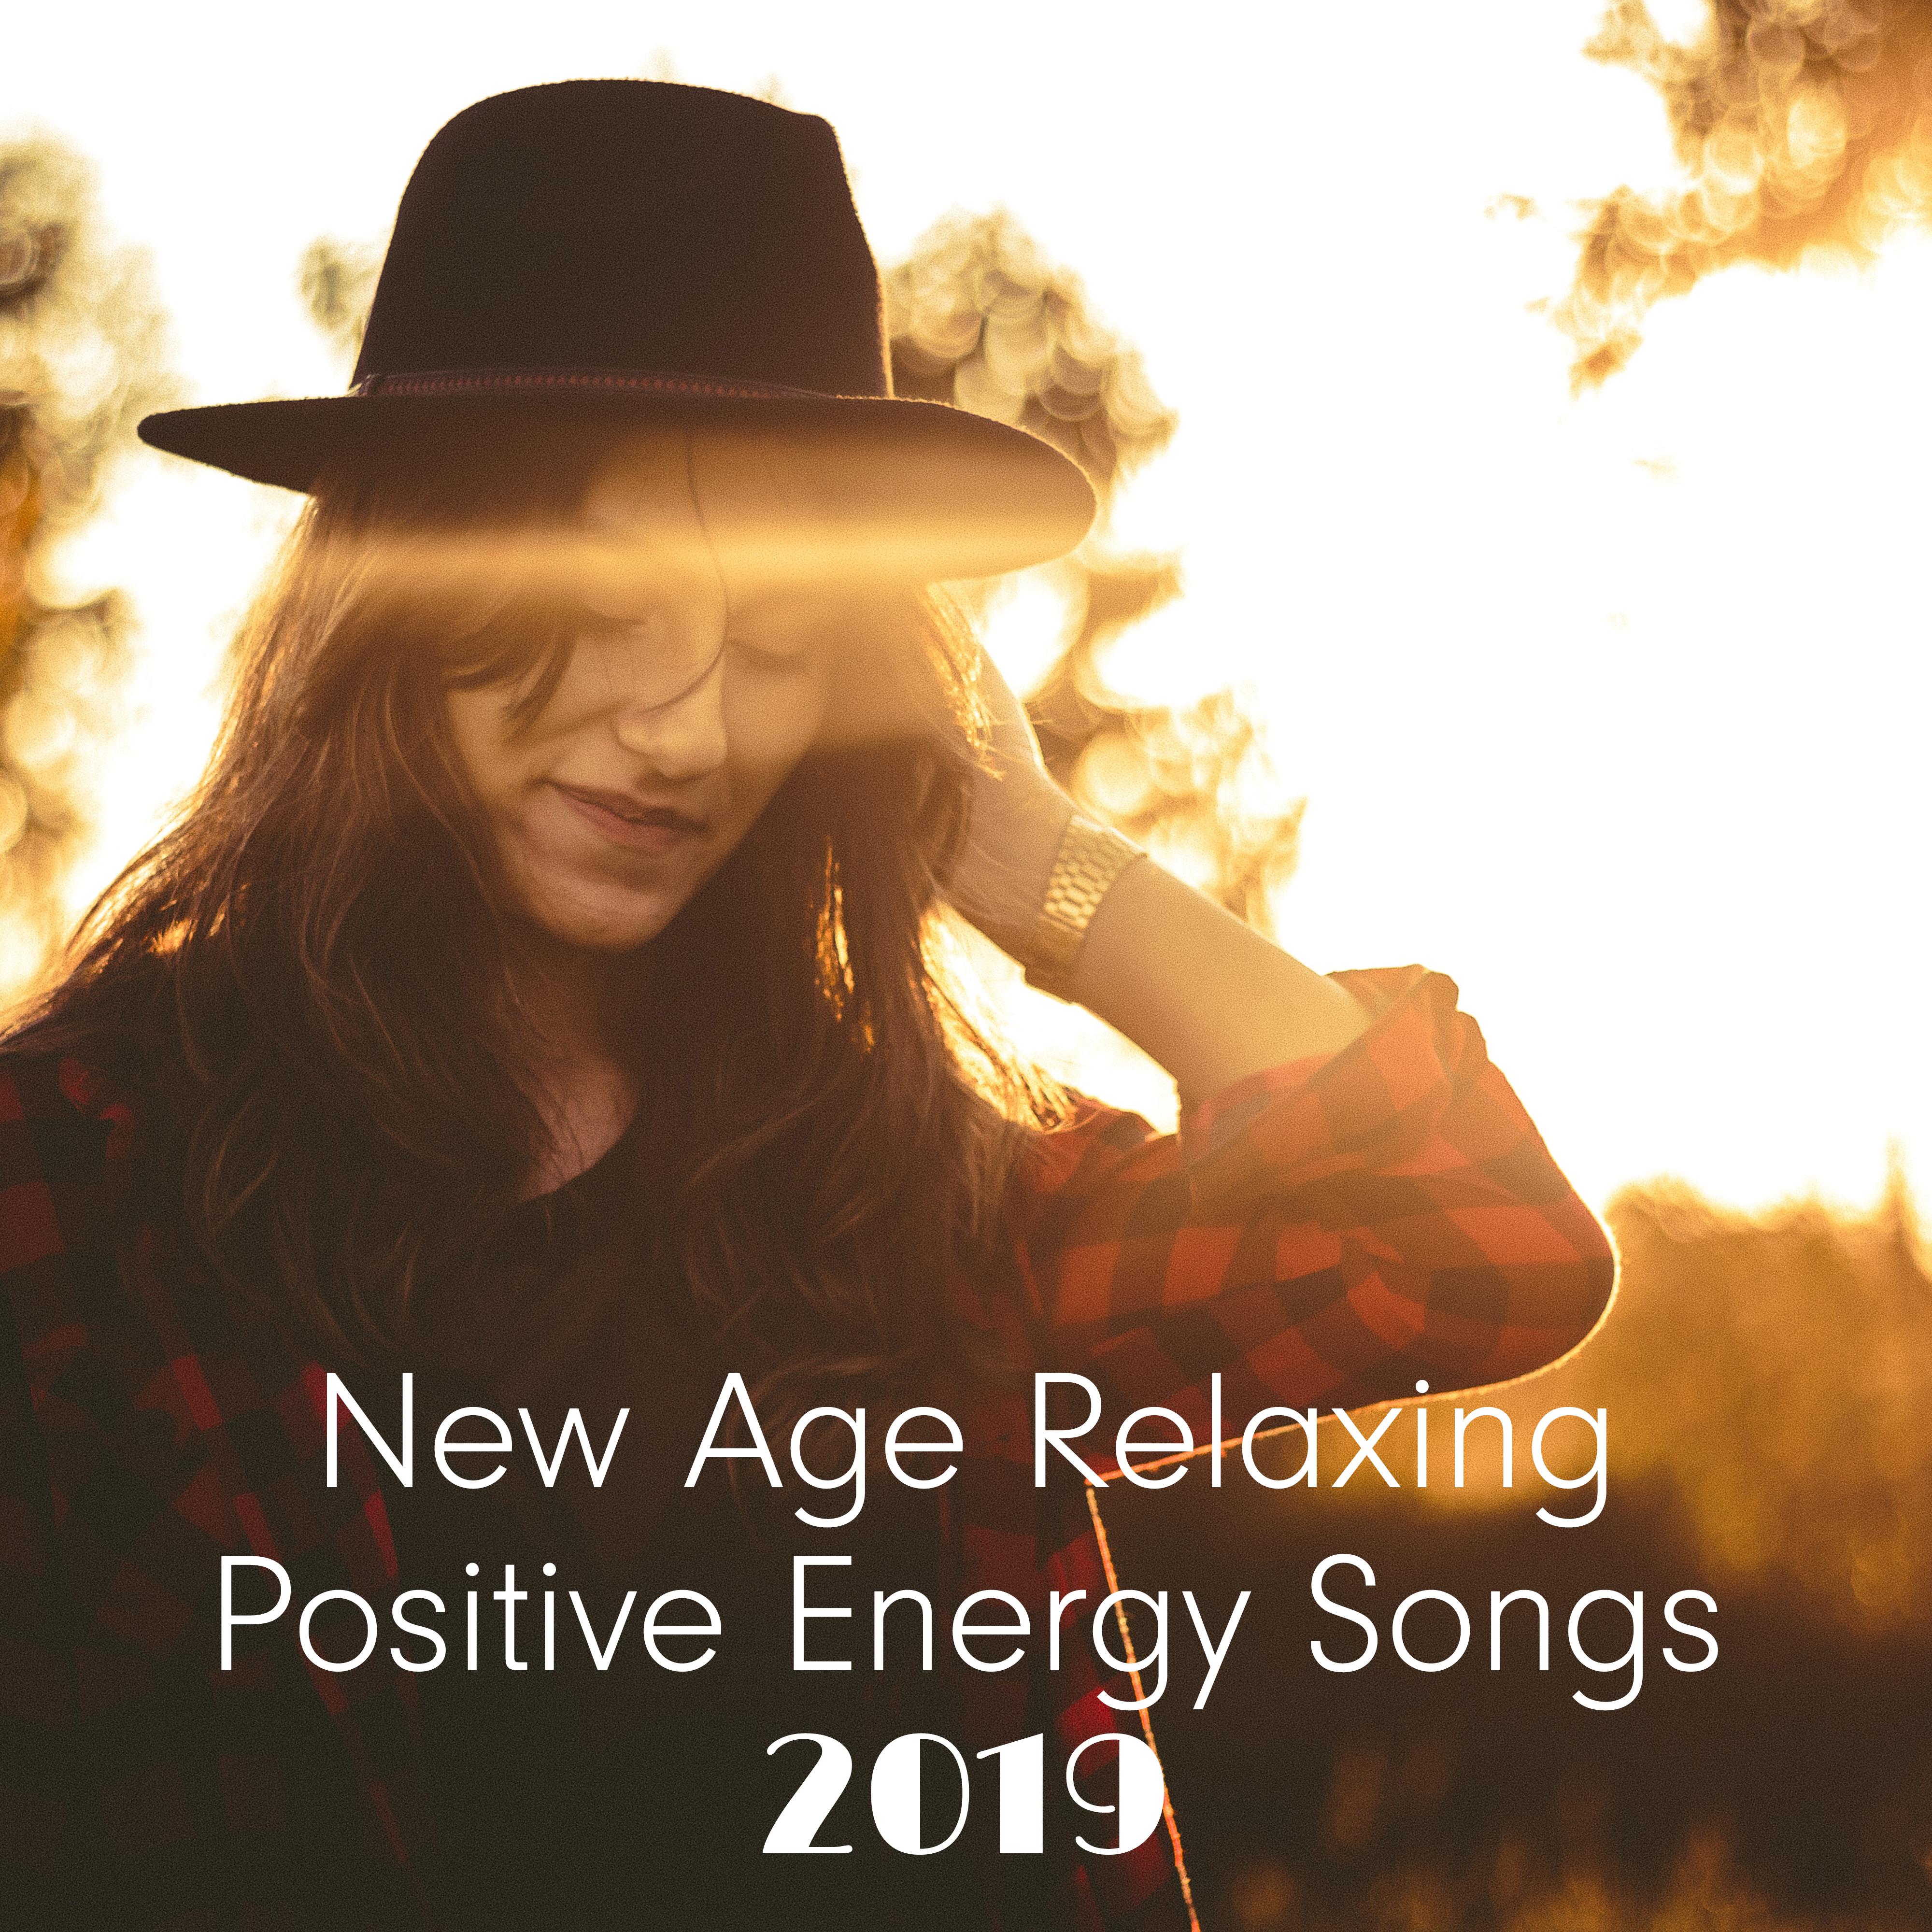 New Age Relaxing Positive Energy Songs 2019